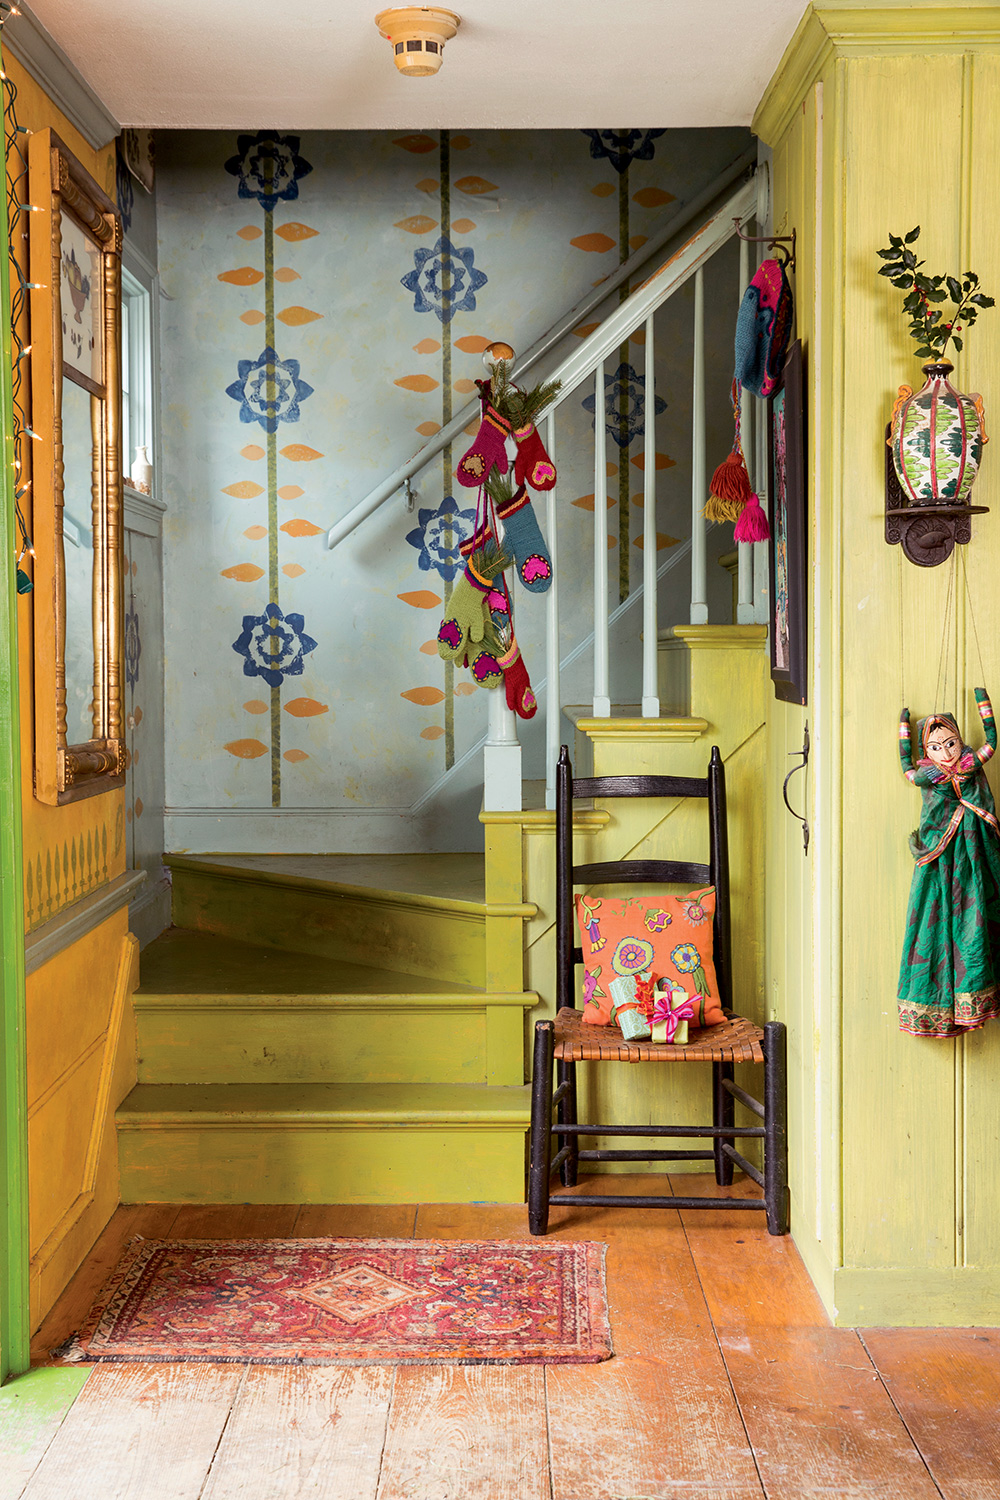 The stairway in Kristin Nicholas’s home is festooned with her art, from the hand-painted walls to the knitted mittens to the embroidered pillow.